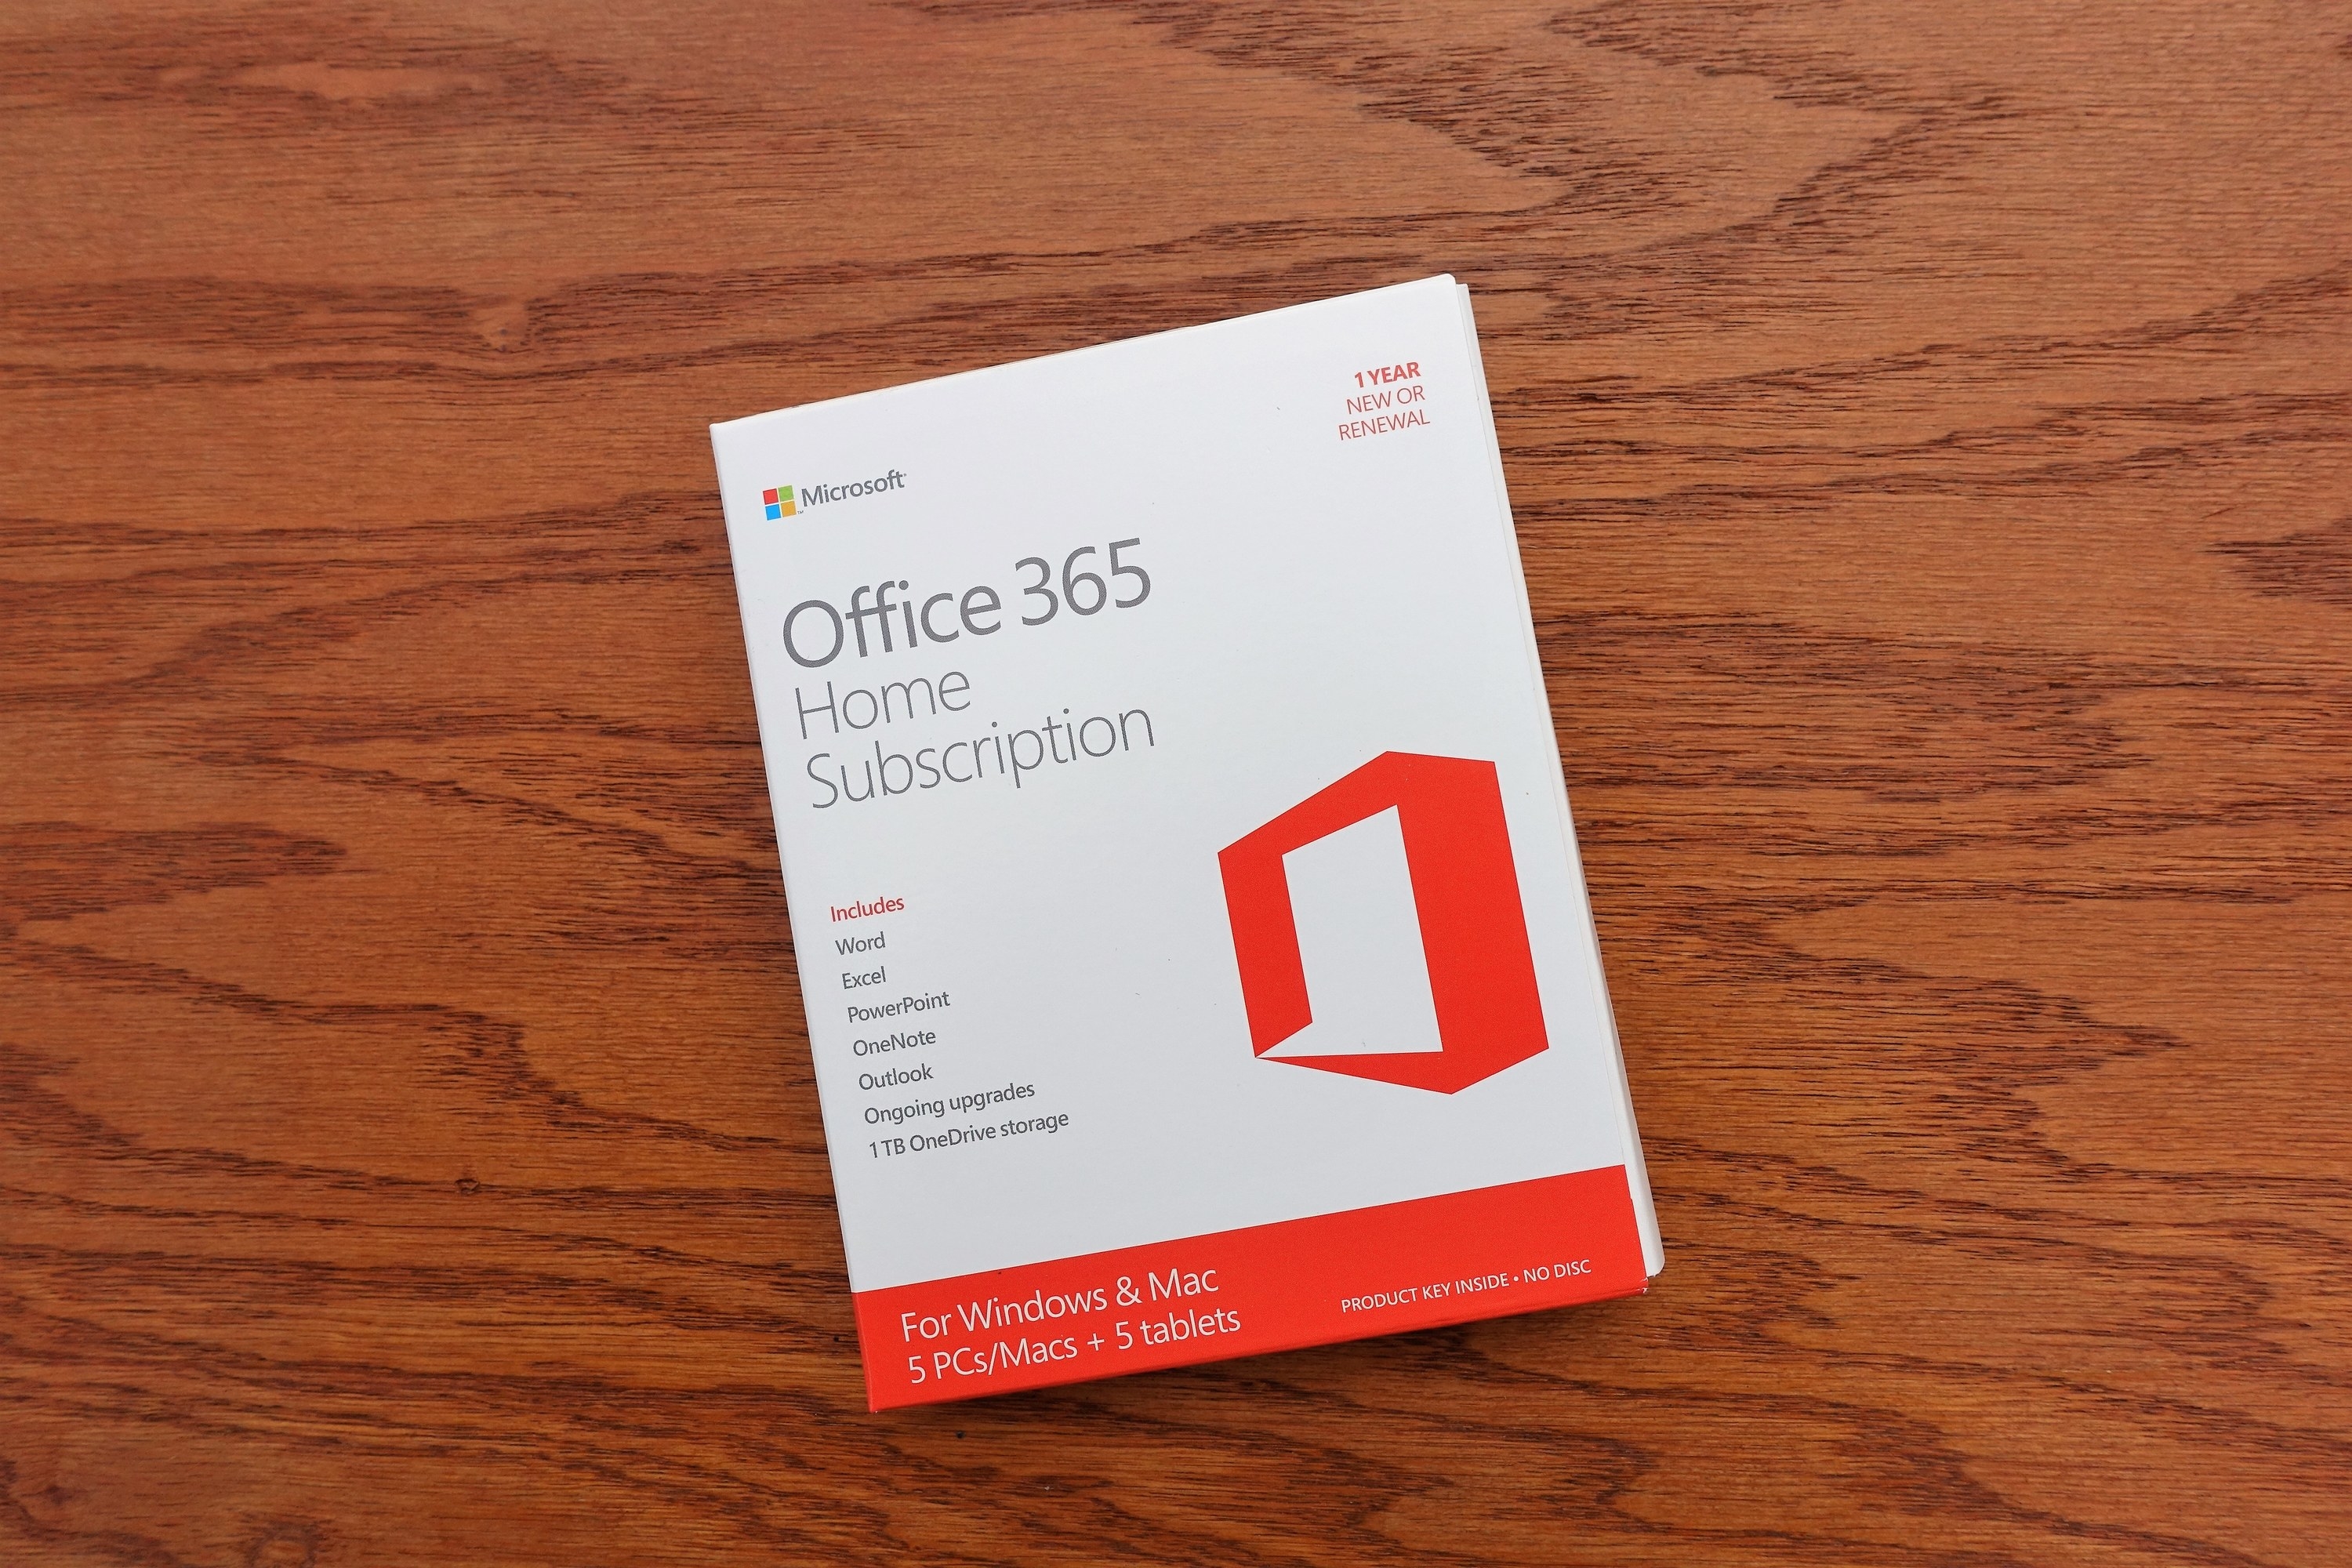 A box of Microsoft Office software